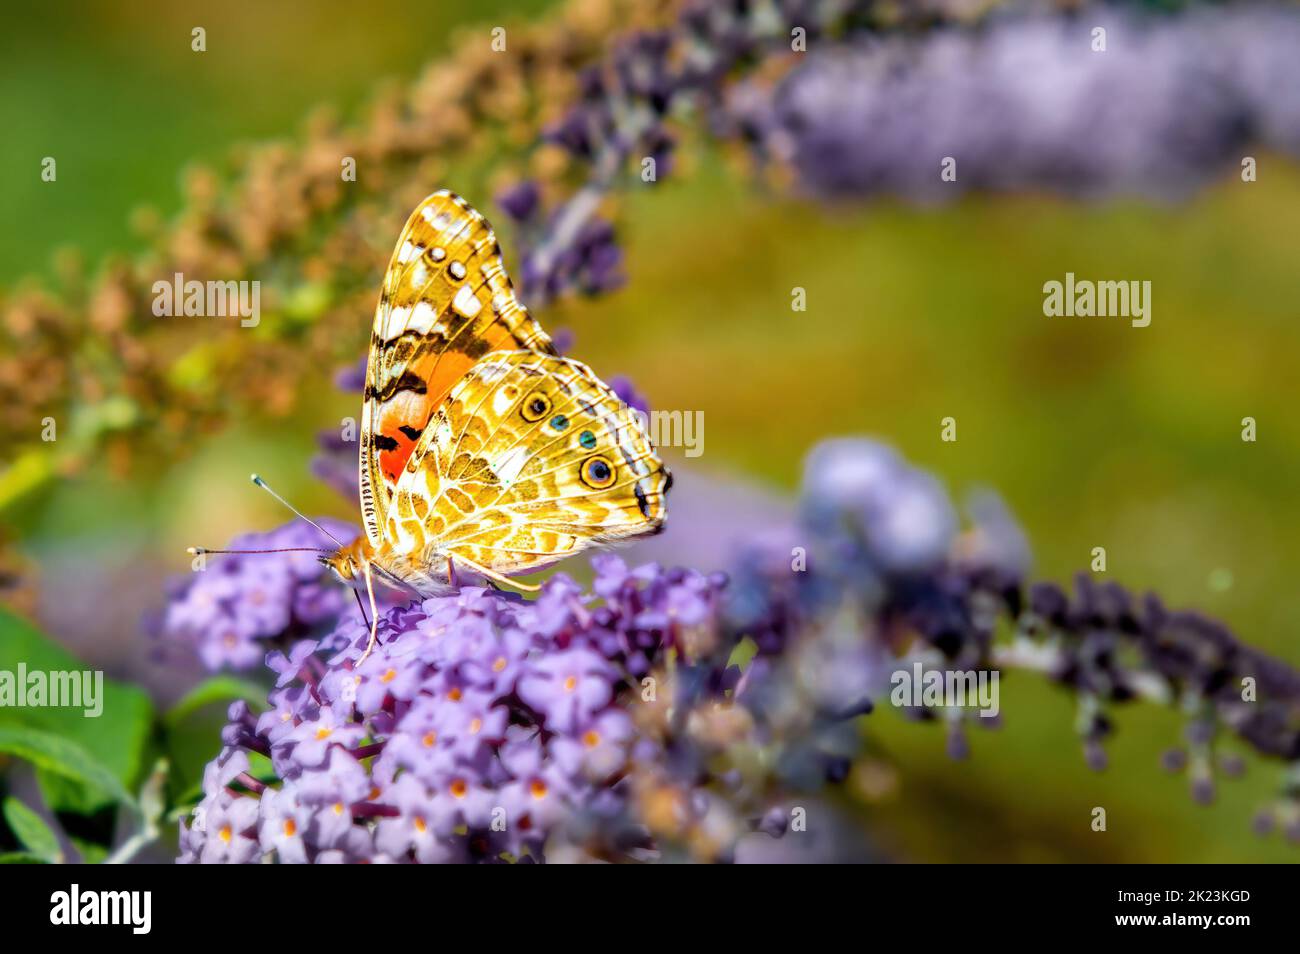 A Vanessa (Cynthia) cardui, Nymphalinae on a purple Buddleja flower in the botanic garden of Kiev, Ukraine, during a hot summer day Stock Photo